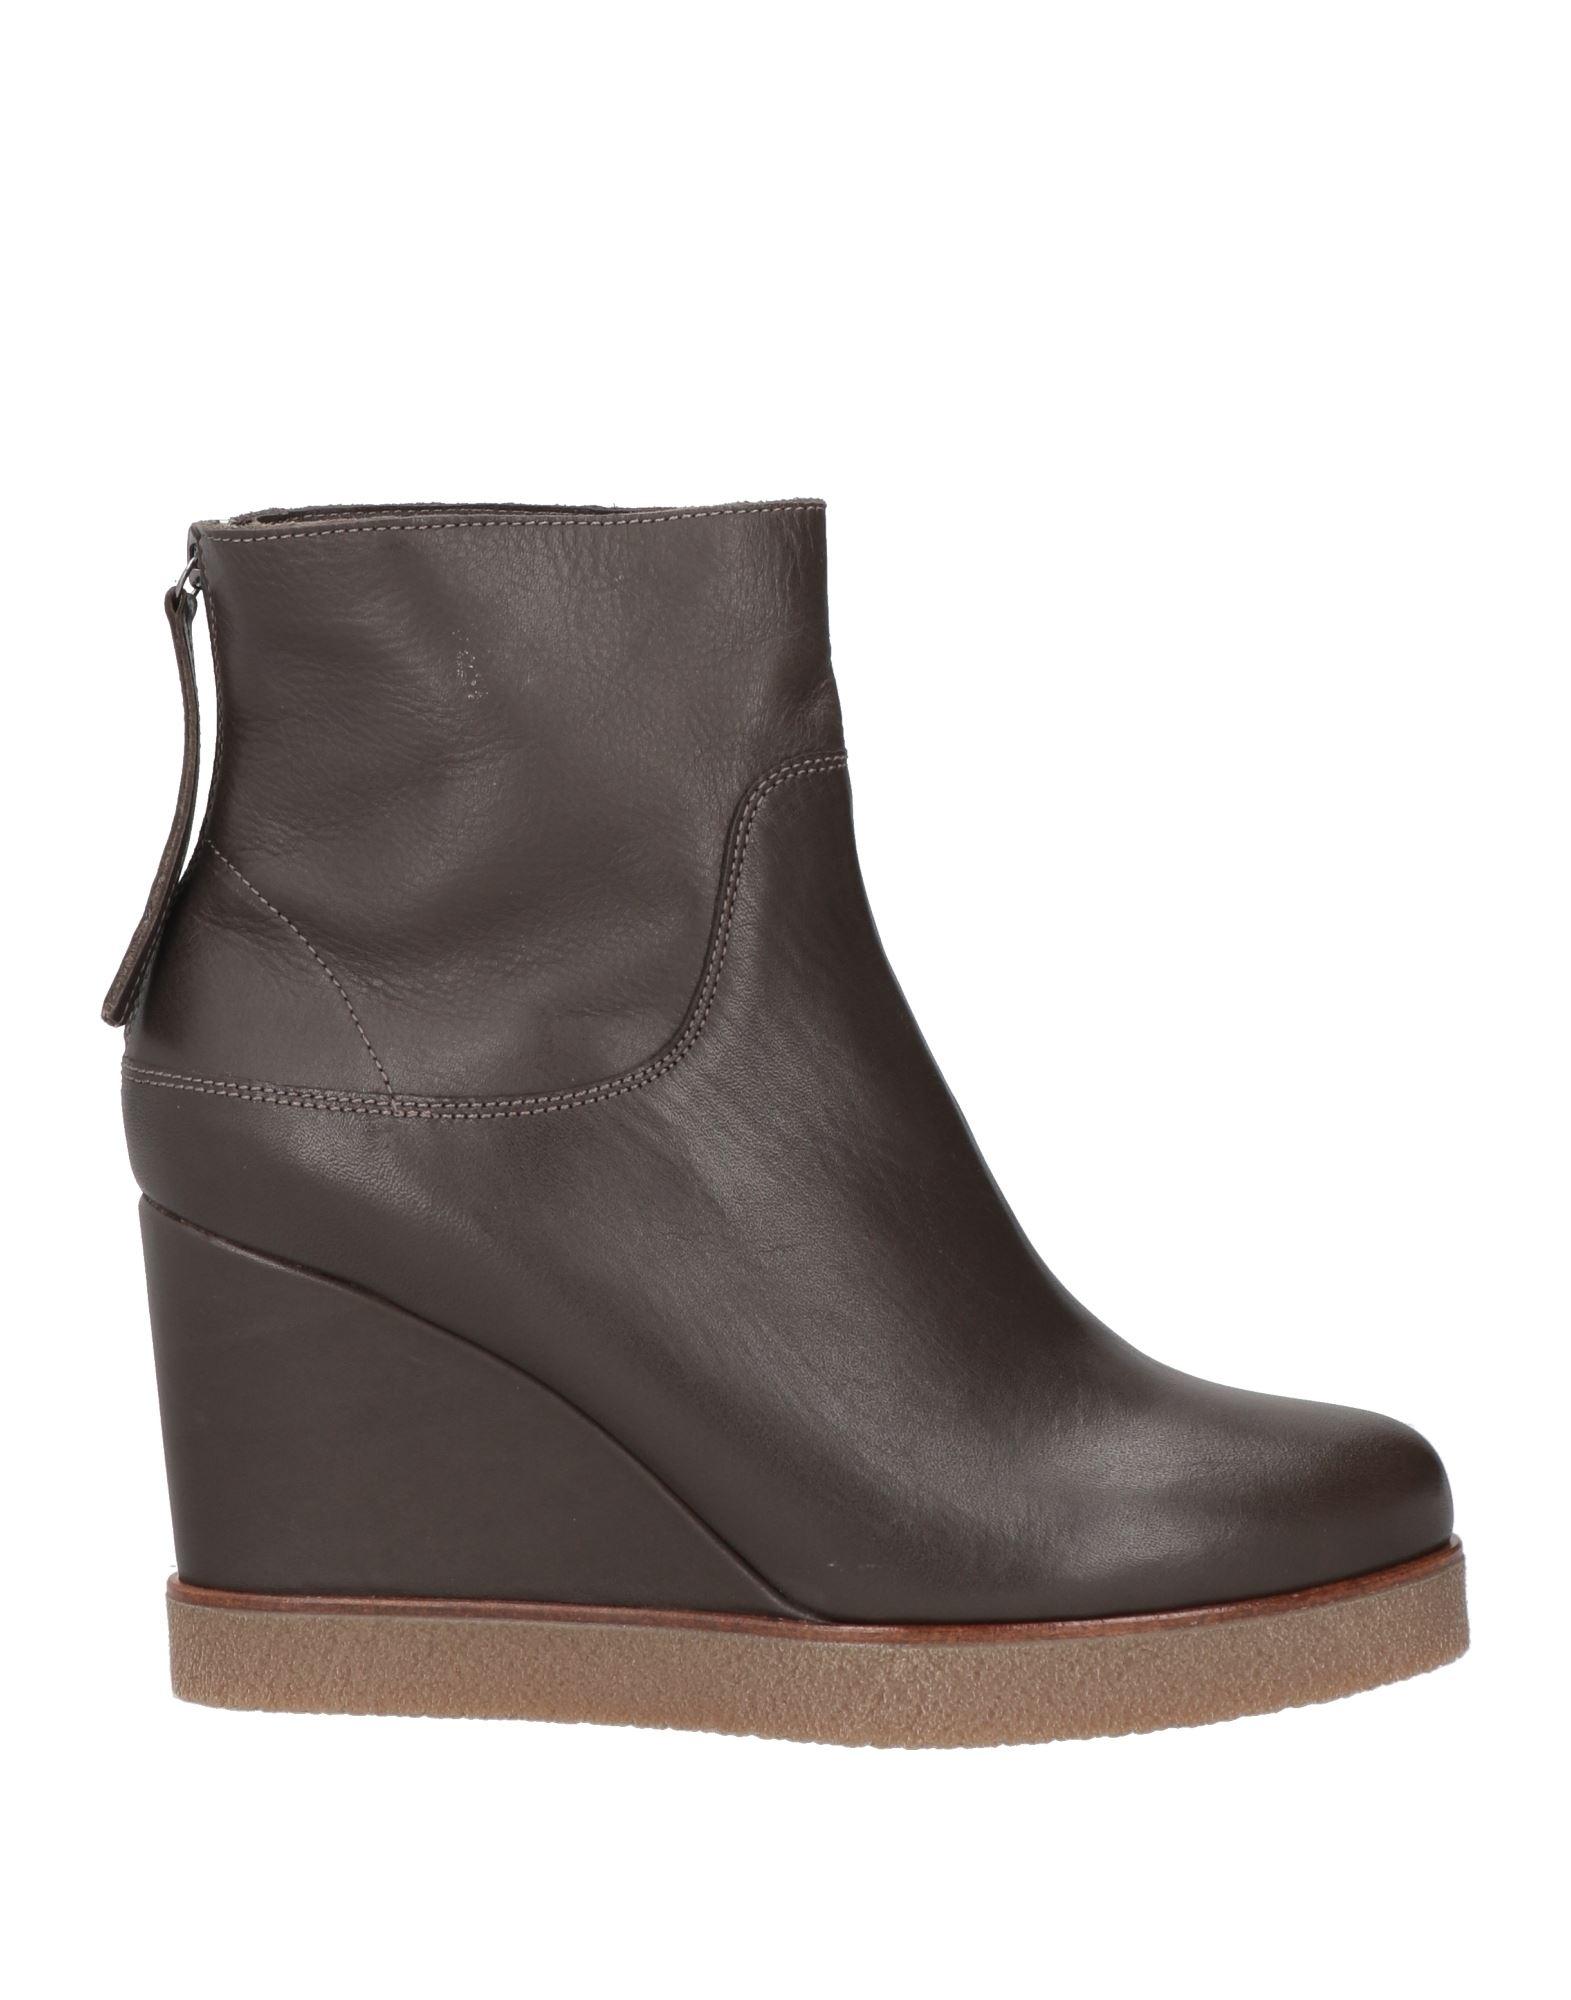 Unisa Ankle Boots in Brown | Lyst